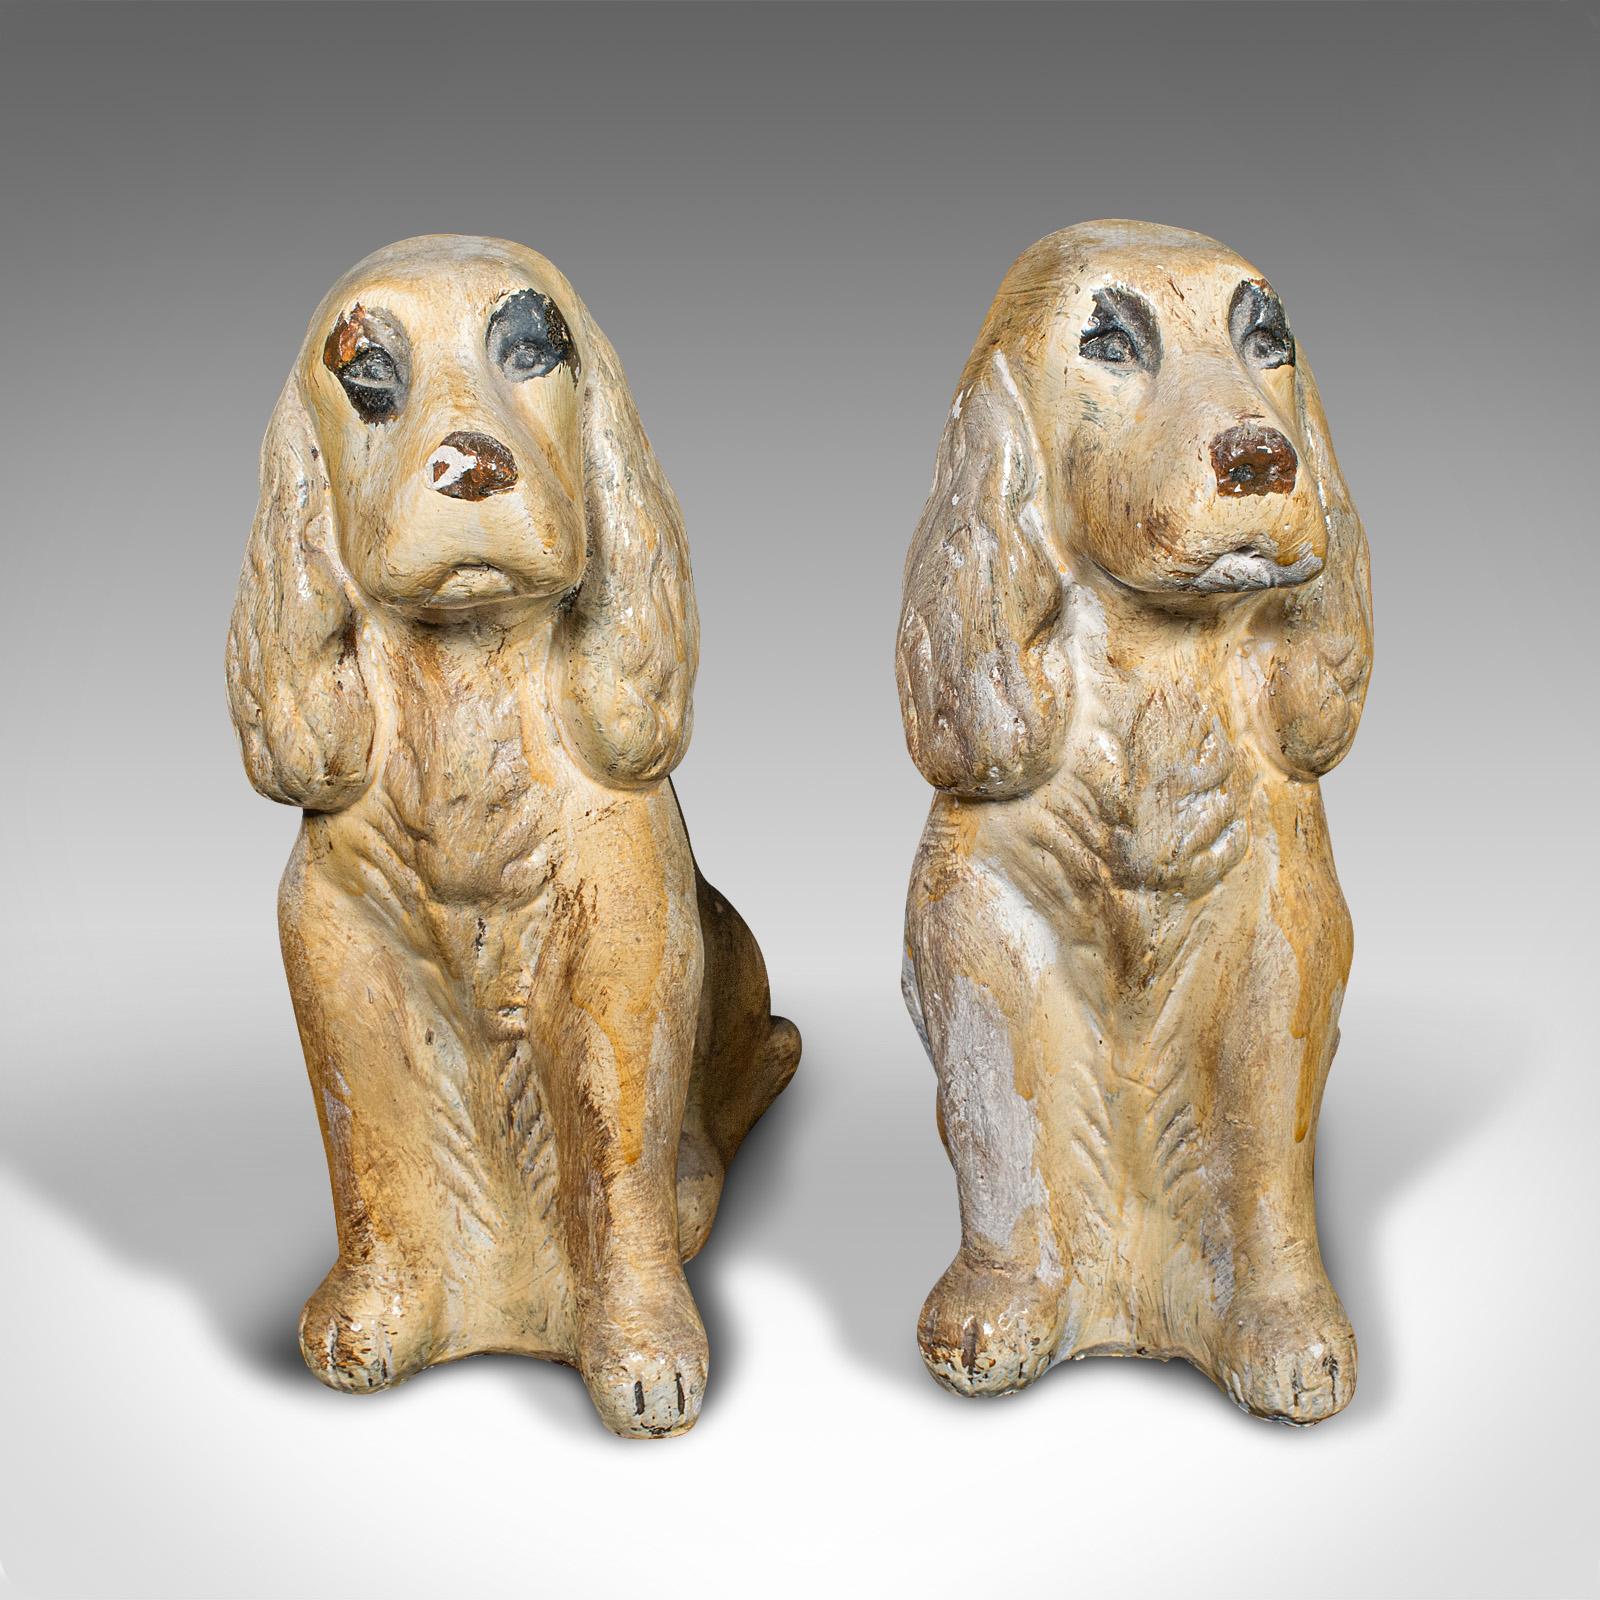 This is a pair of antique cocker spaniel figures. An English, plaster dog fireside ornament or doorstop, dating to the Edwardian period, circa 1910.

Faithful friends, ideal for accentuating the lounge or as doorstops
Displaying a desirable aged